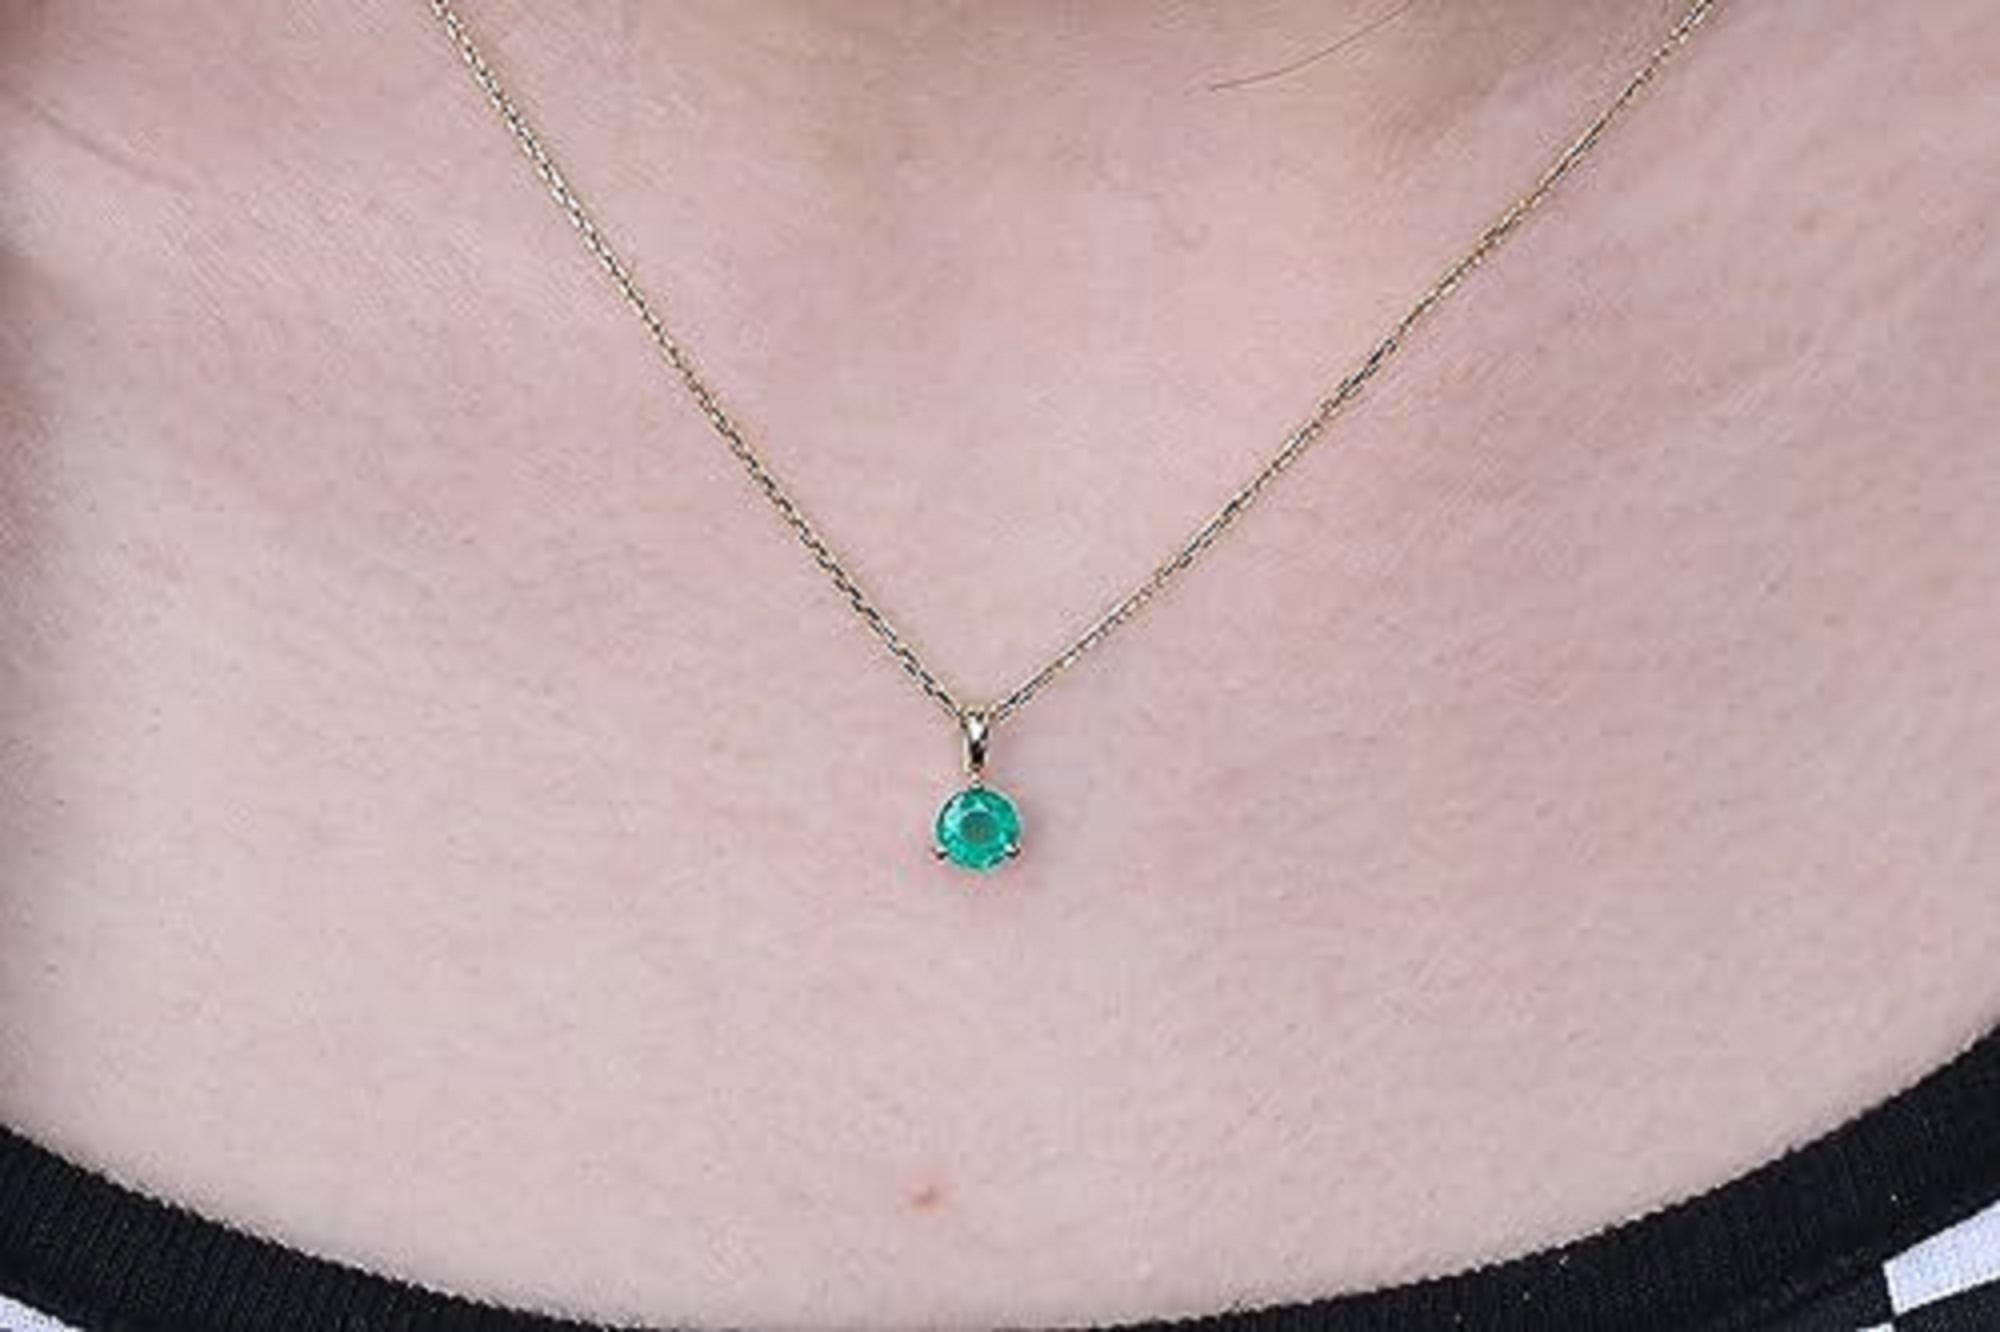 Decorate yourself in elegance with this Pendant is crafted from 10-karat Yellow Gold by Gin & Grace. This Pendant is made up of 5.0 Round-cut Emerald (1 Pcs) 0.470 carat. This Pendant is weight 0.280 grams. This delicate Pendant is polished to a